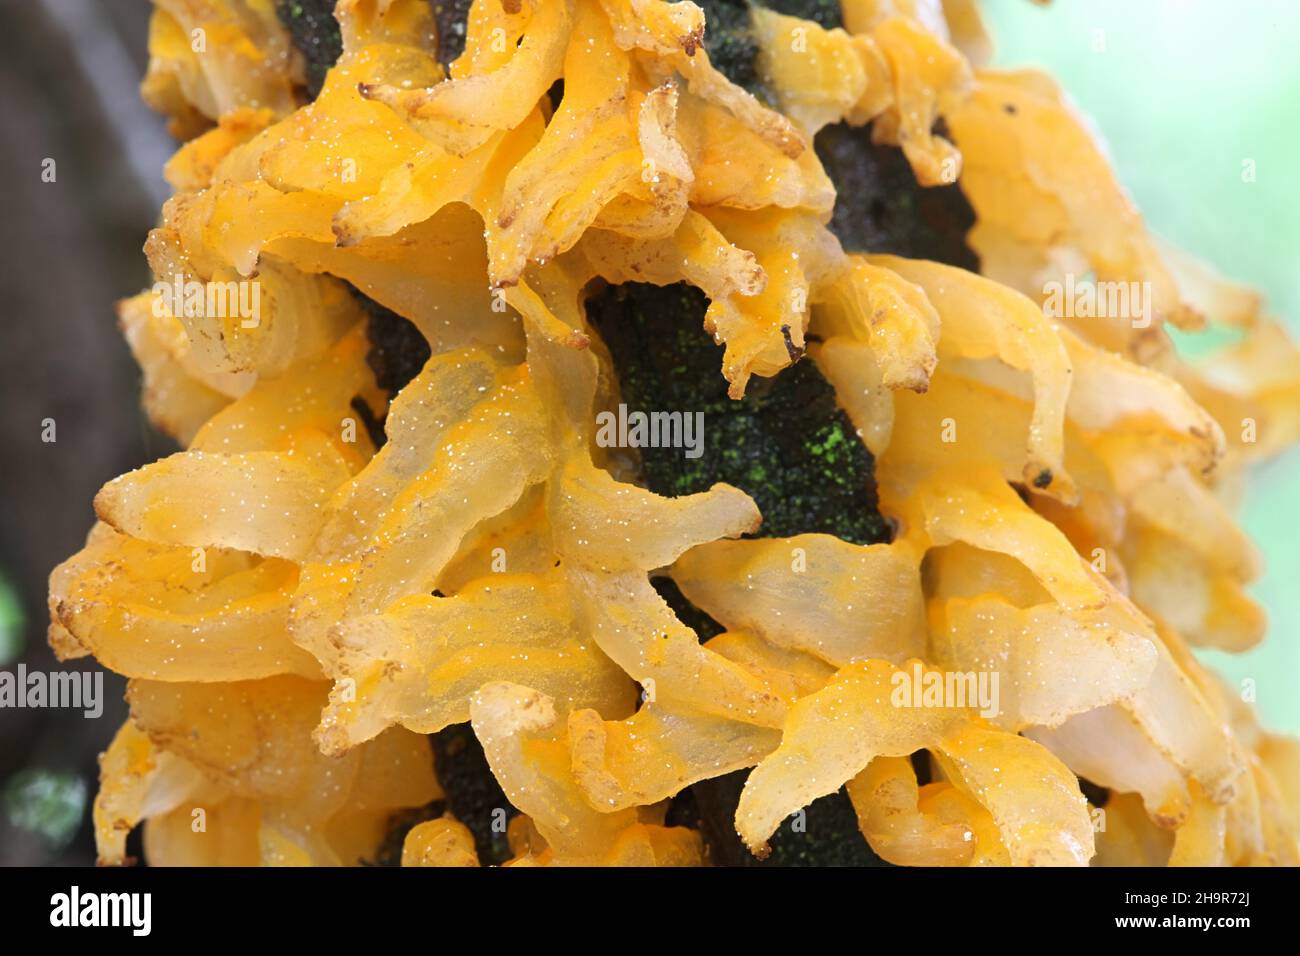 Gymnosporangium clavariiforme, commonly known as tongues of fire, wild fungus from Finland Stock Photo